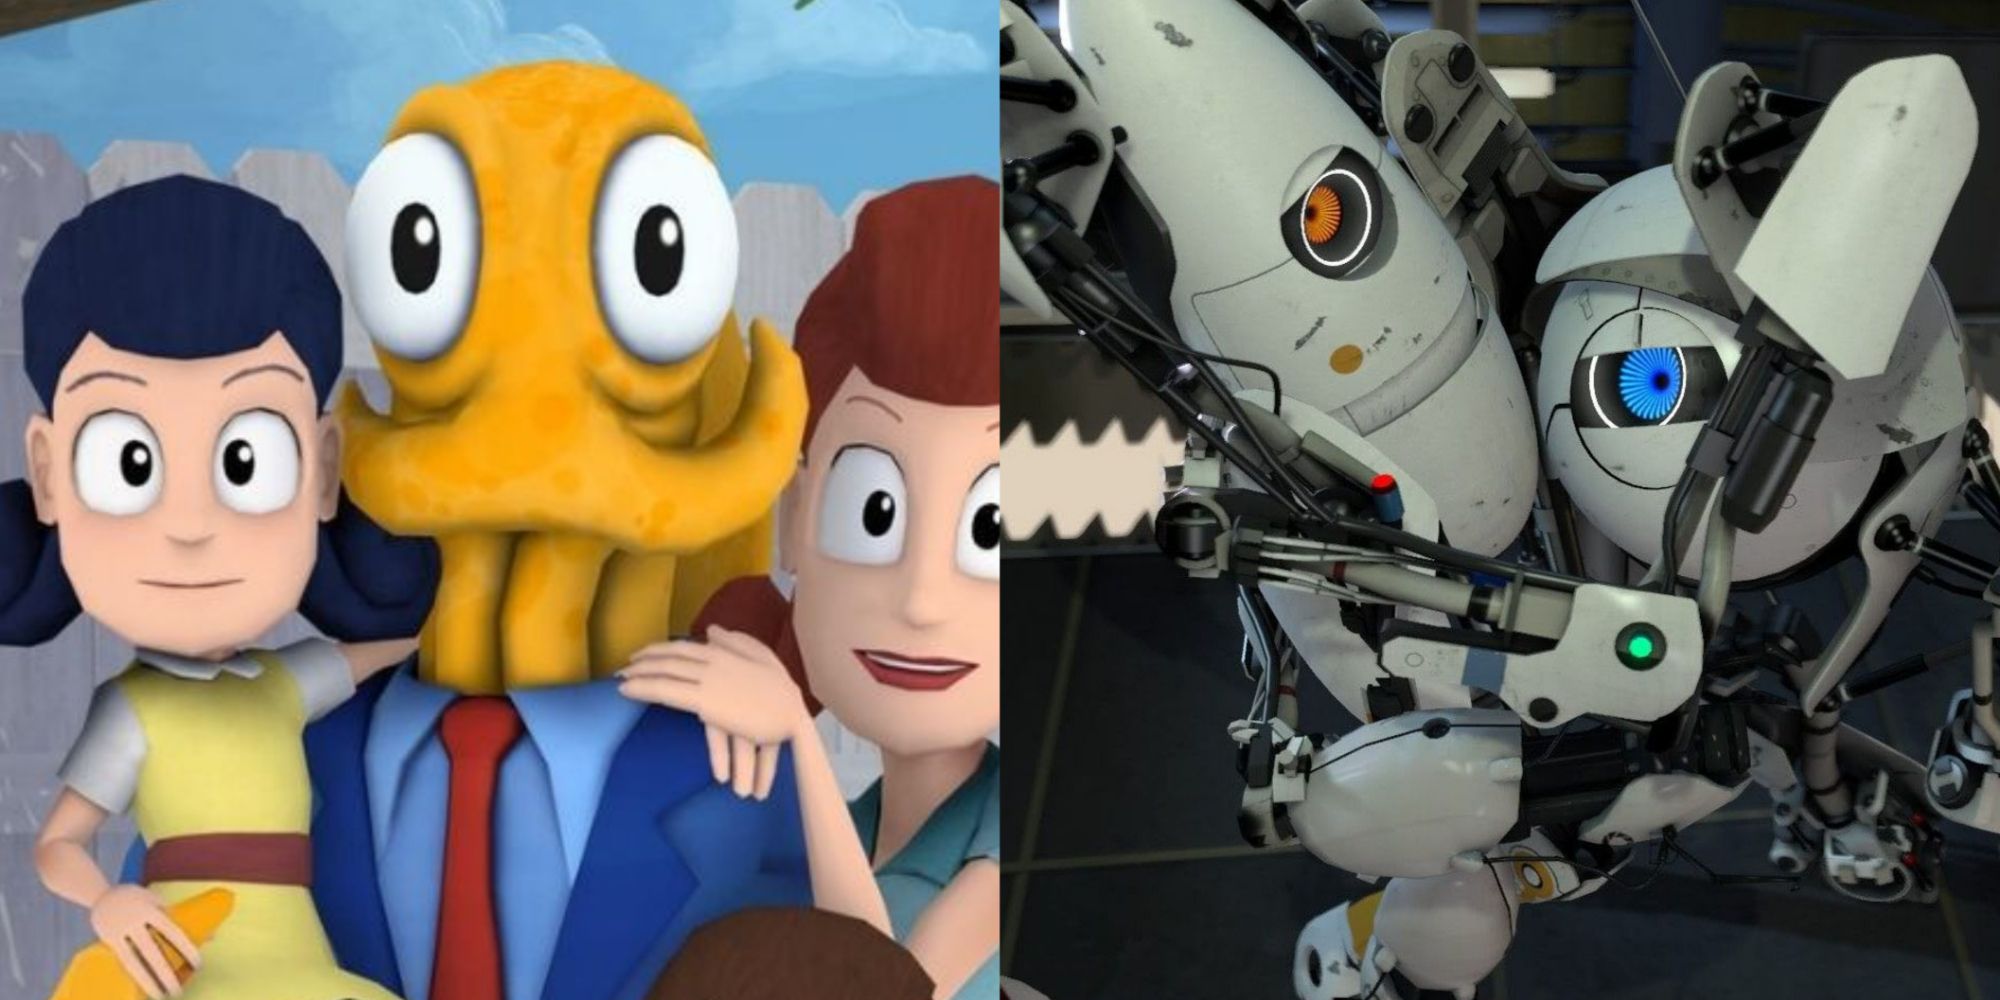 A split image of Octodad and Portal 2